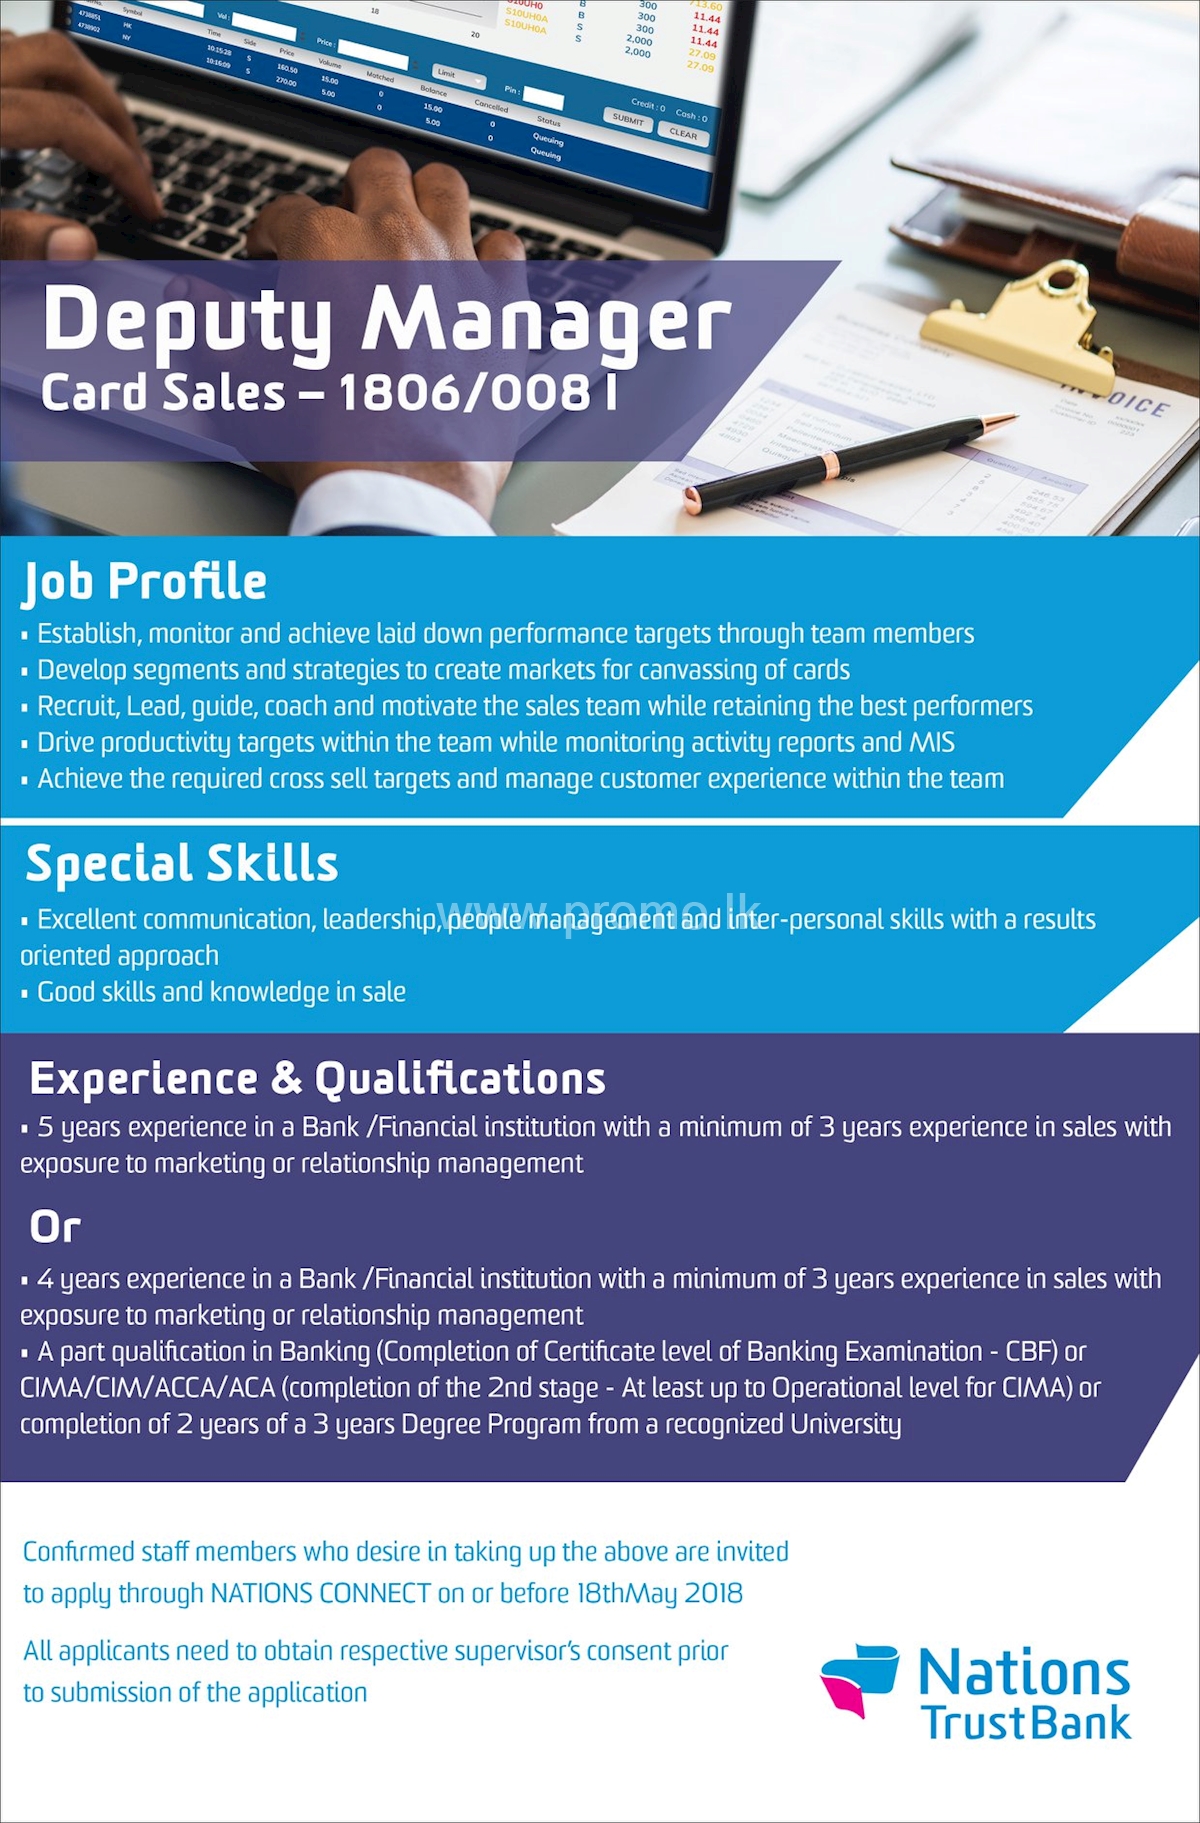 Deputy Manager - Card Sales - 1806/0081